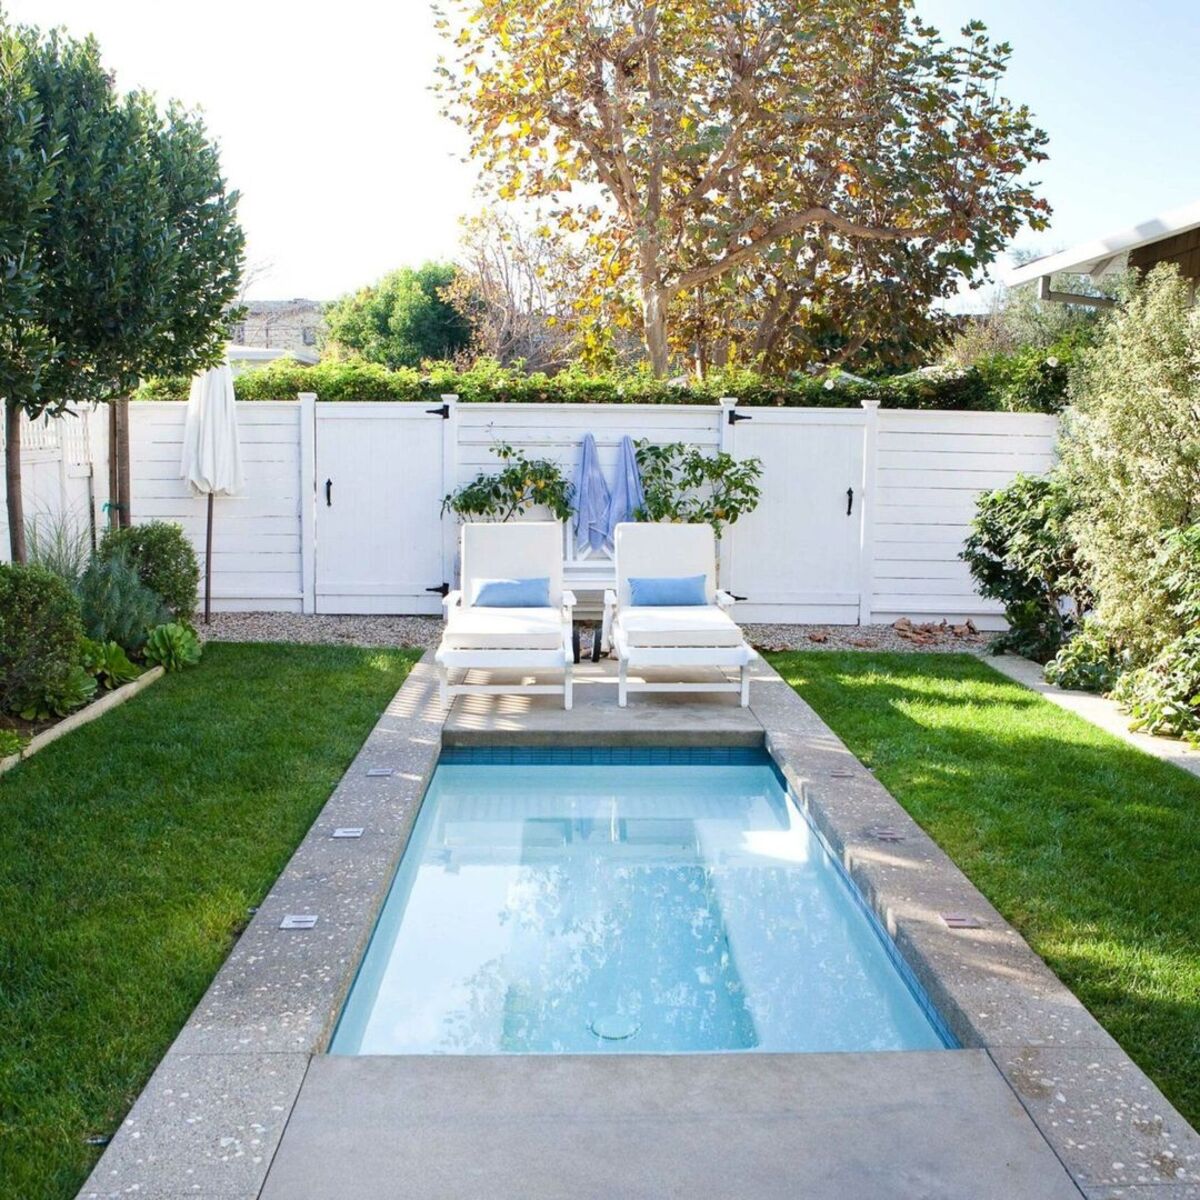 12 pool designs for small yards 11